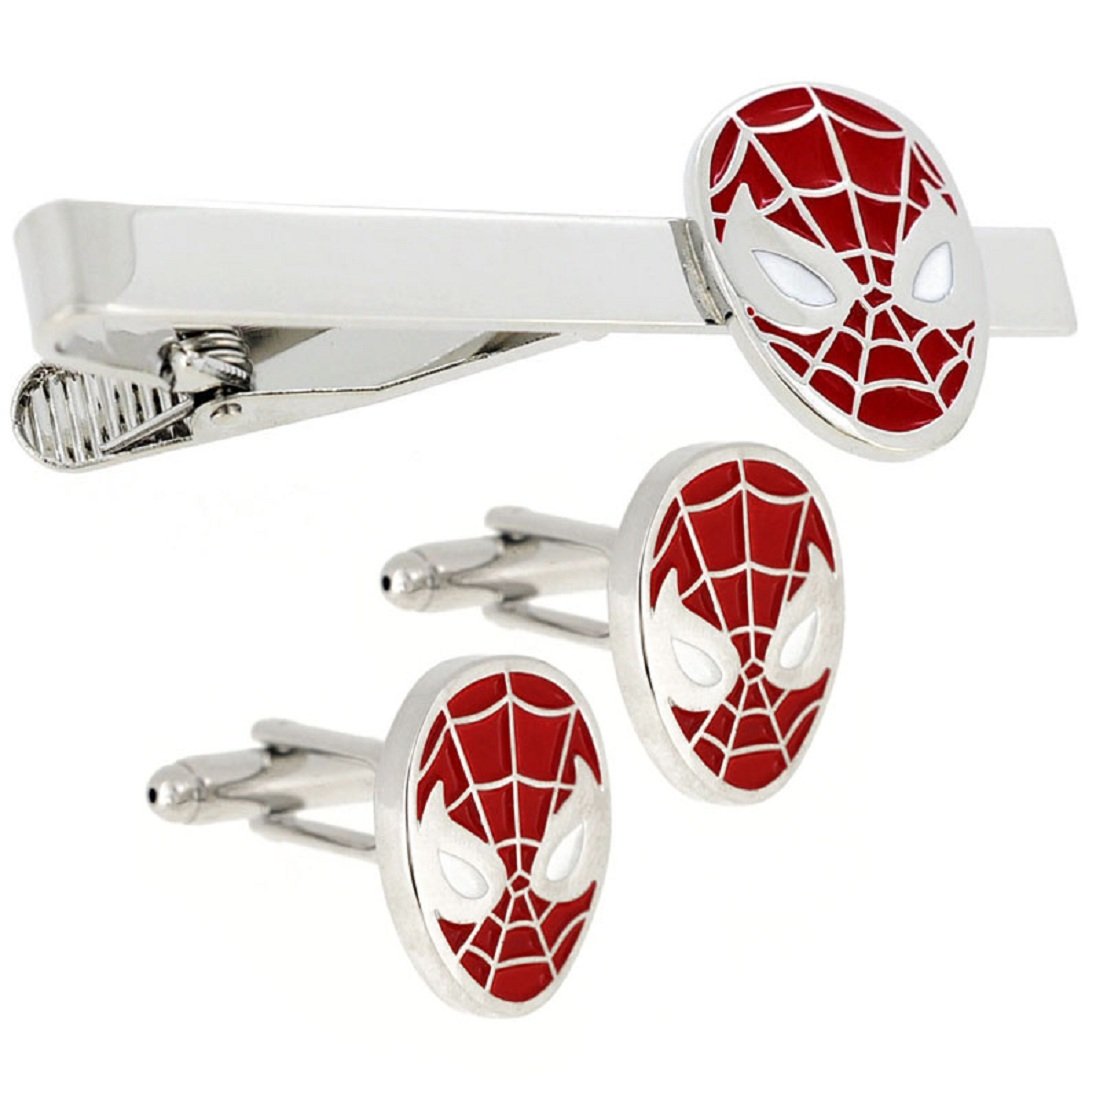 Red Spiderman Cufflinks and Tie Clip set - SHOPWITHSTYLE